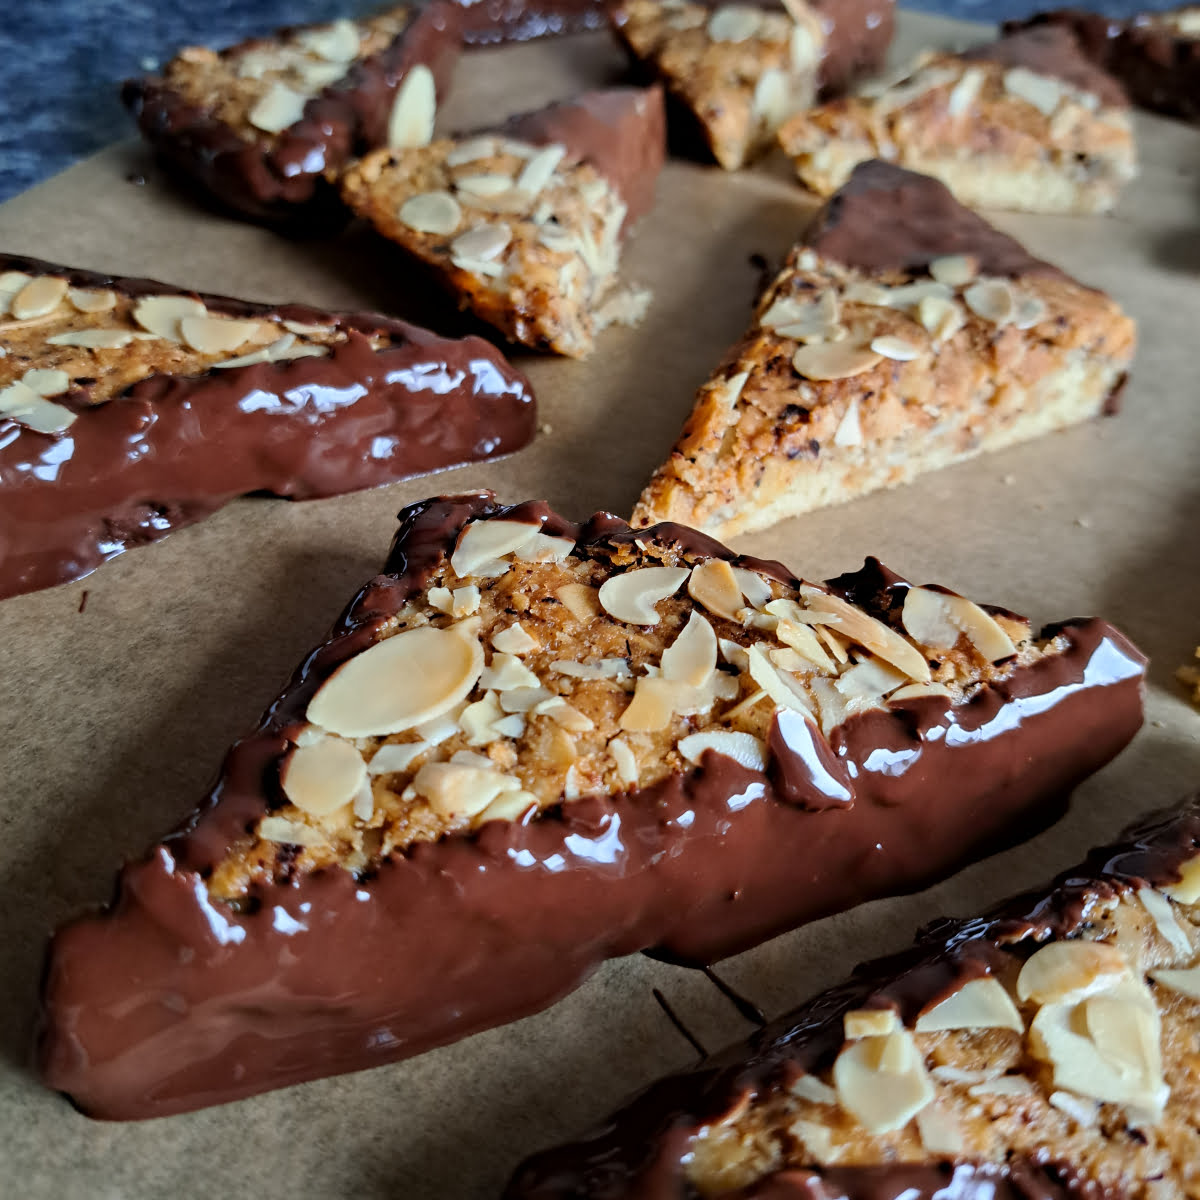 German nut corners that are freshly dipped in melted chocolate placed on a parchment paper to dry.